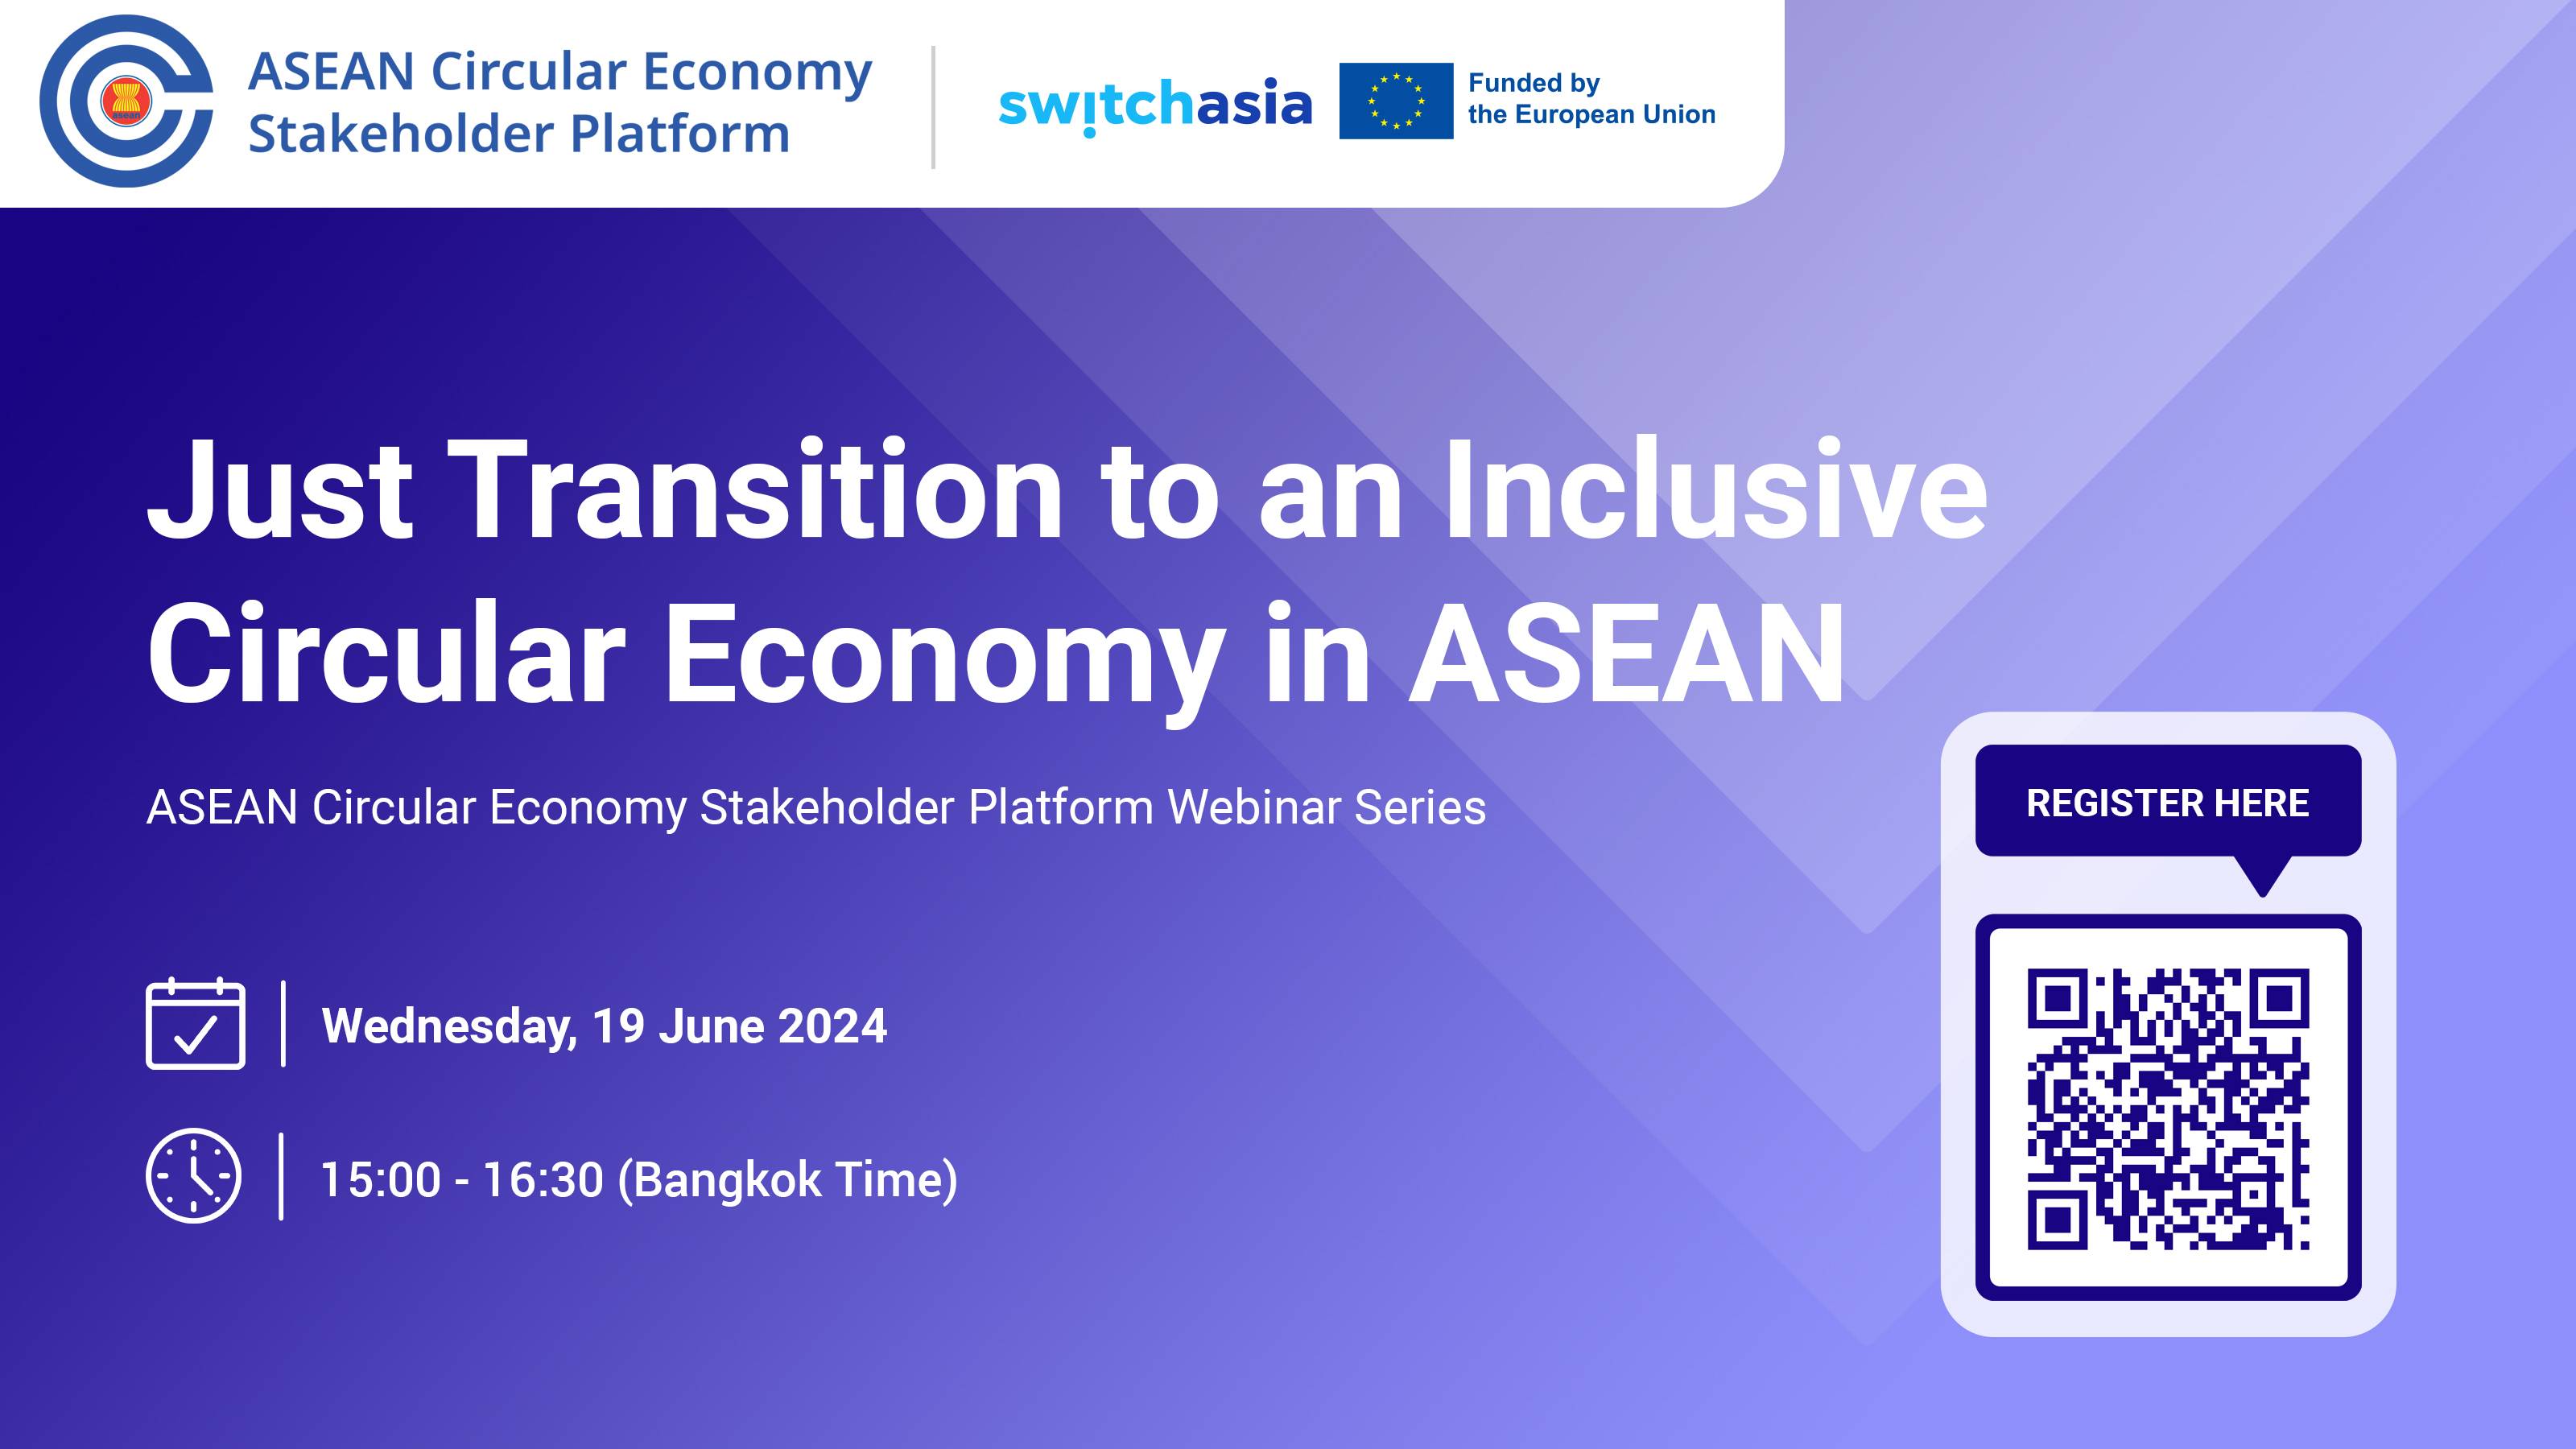 Just Transition to an Inclusive Circular Economy in ASEAN